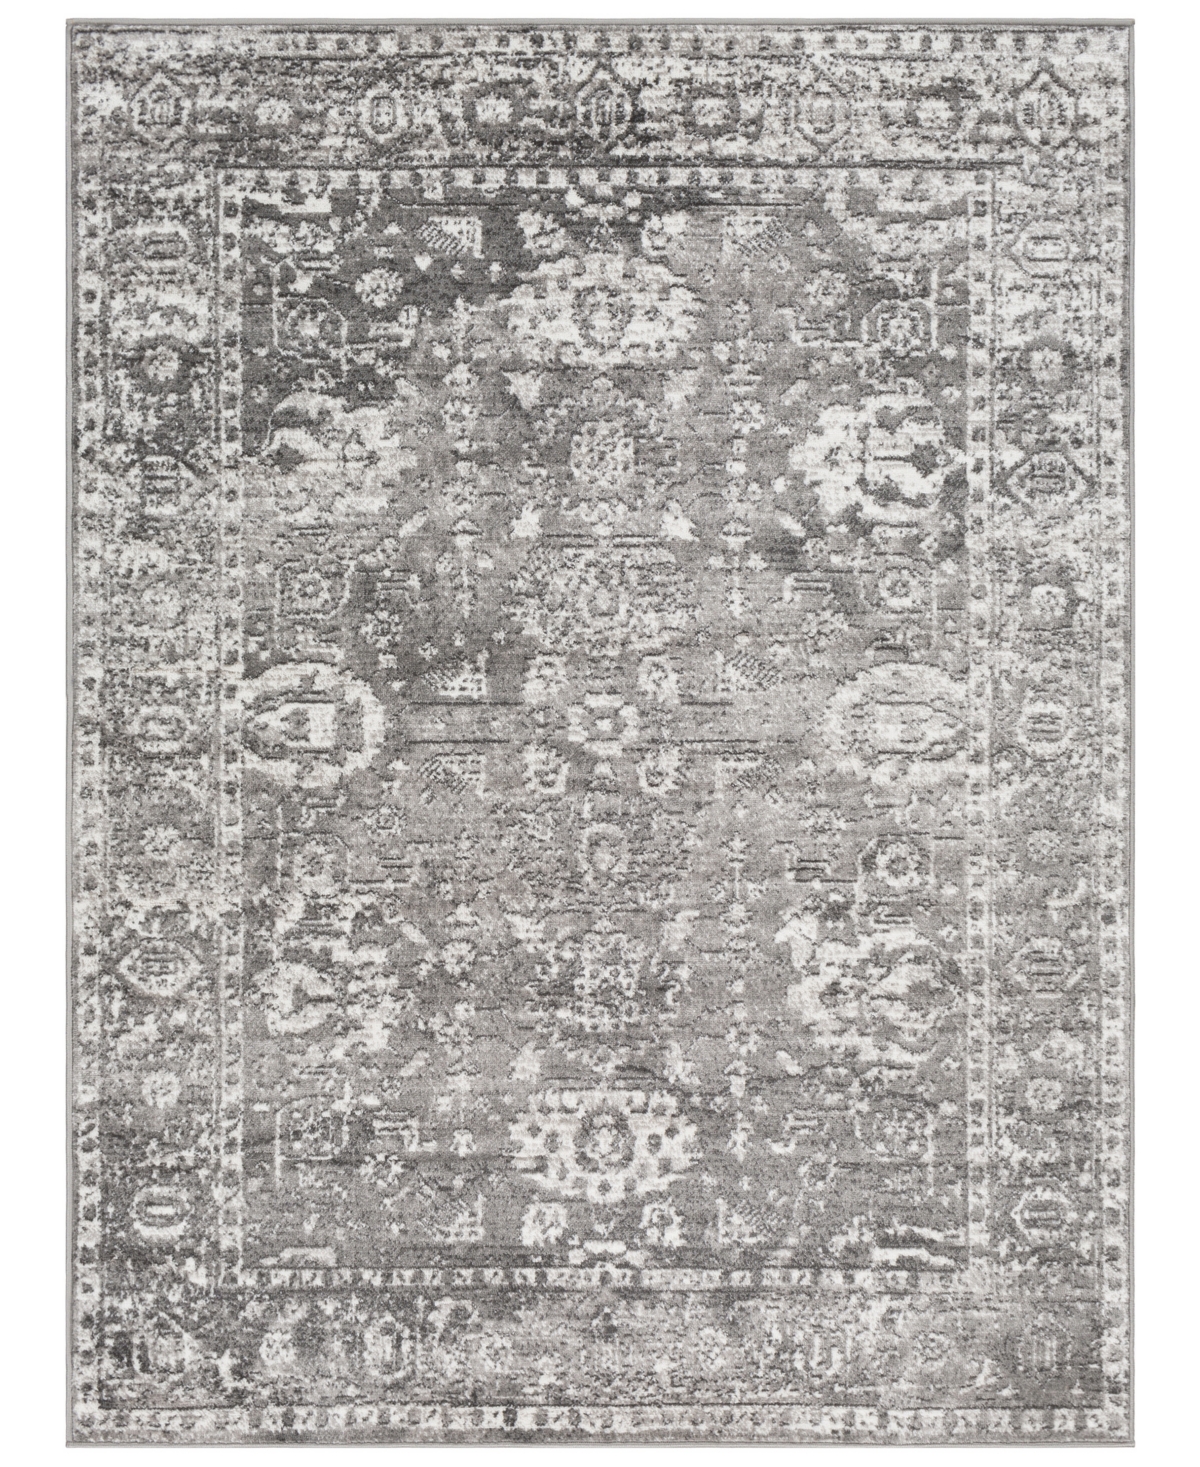 Abbie & Allie Rugs Monte Carlo Mnc-2311 6'7" X 9' Area Rug In Light Gray